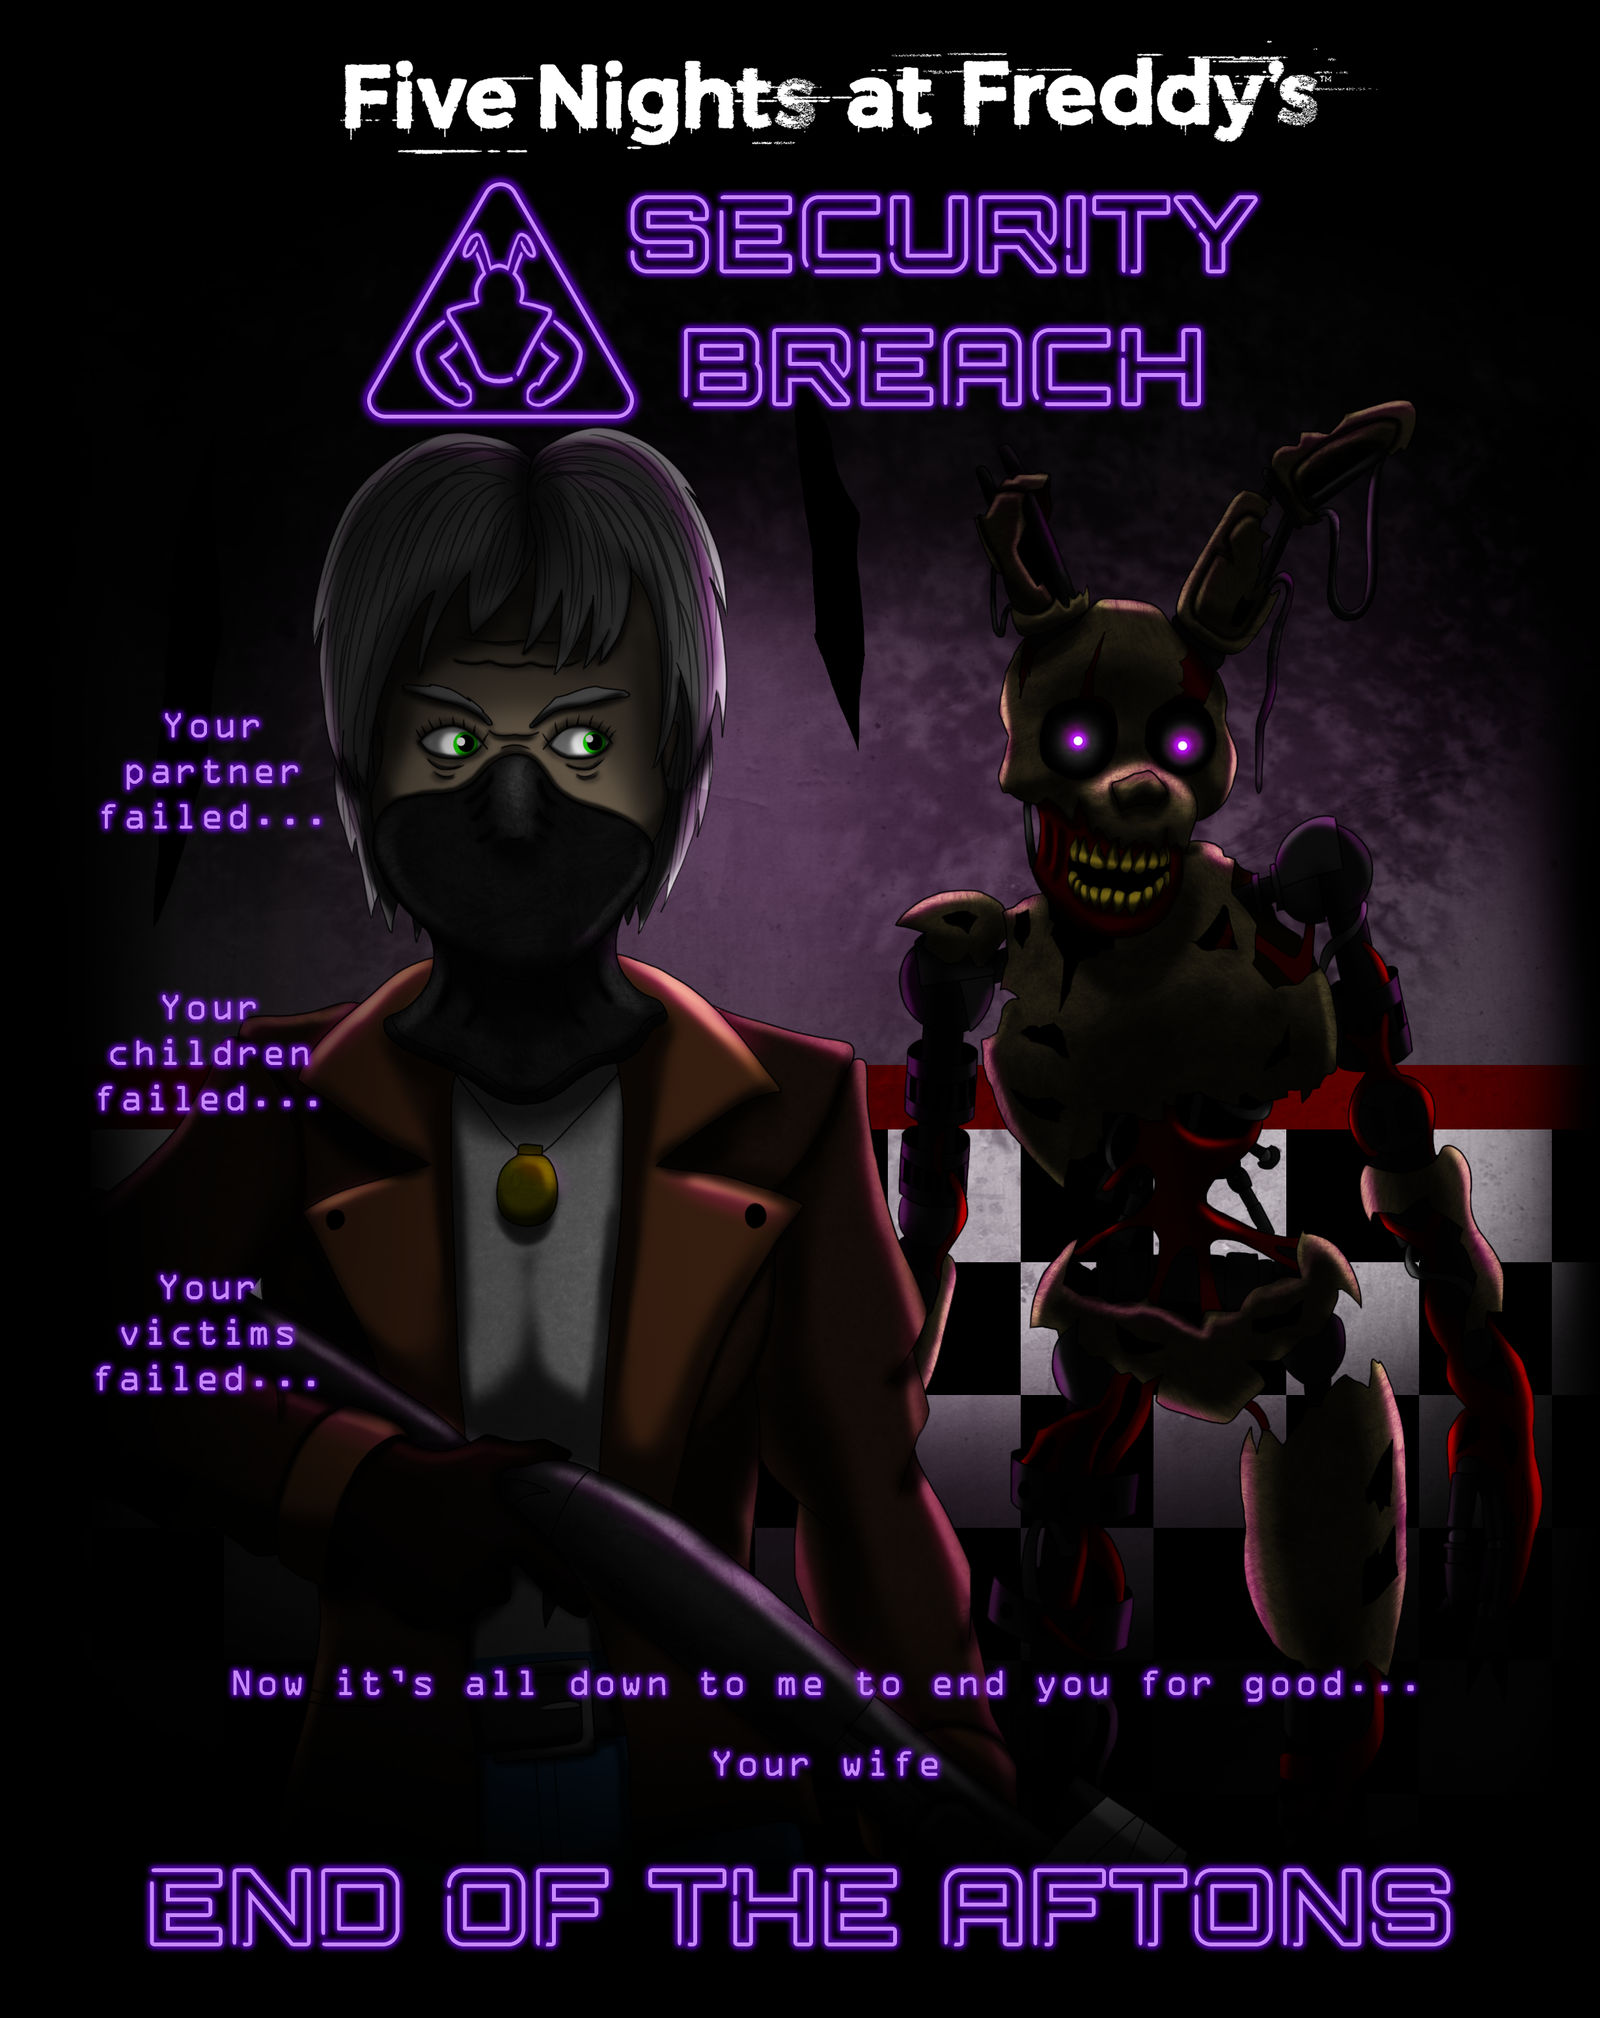 Five Nights At Freddy Security Breach Dlc Release Date, Know More